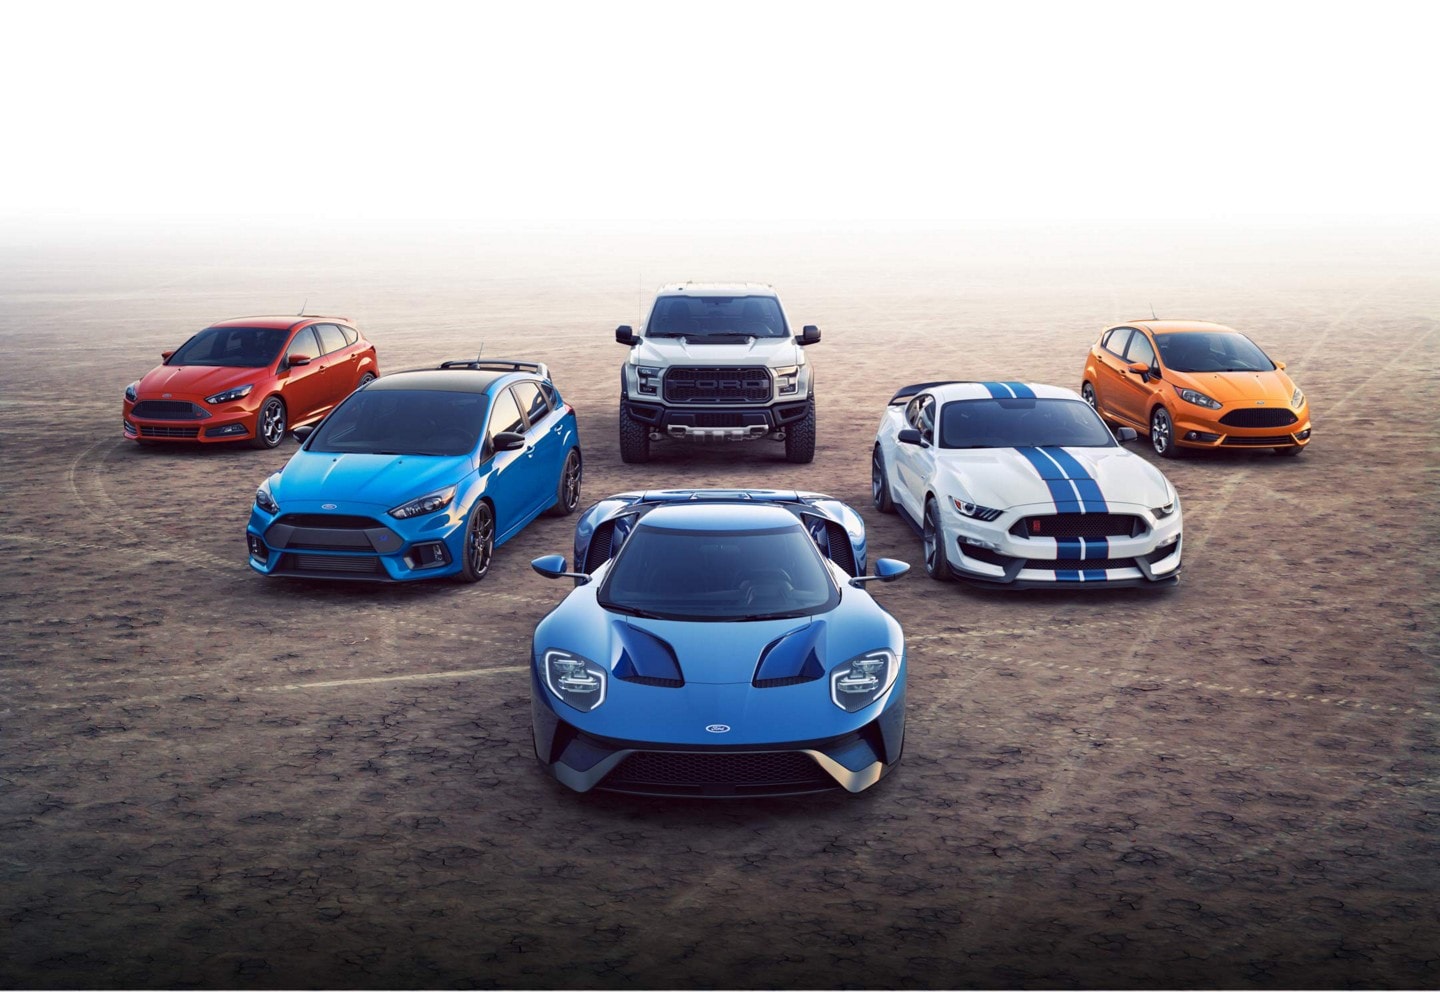 The family of Ford Performance Vehicles